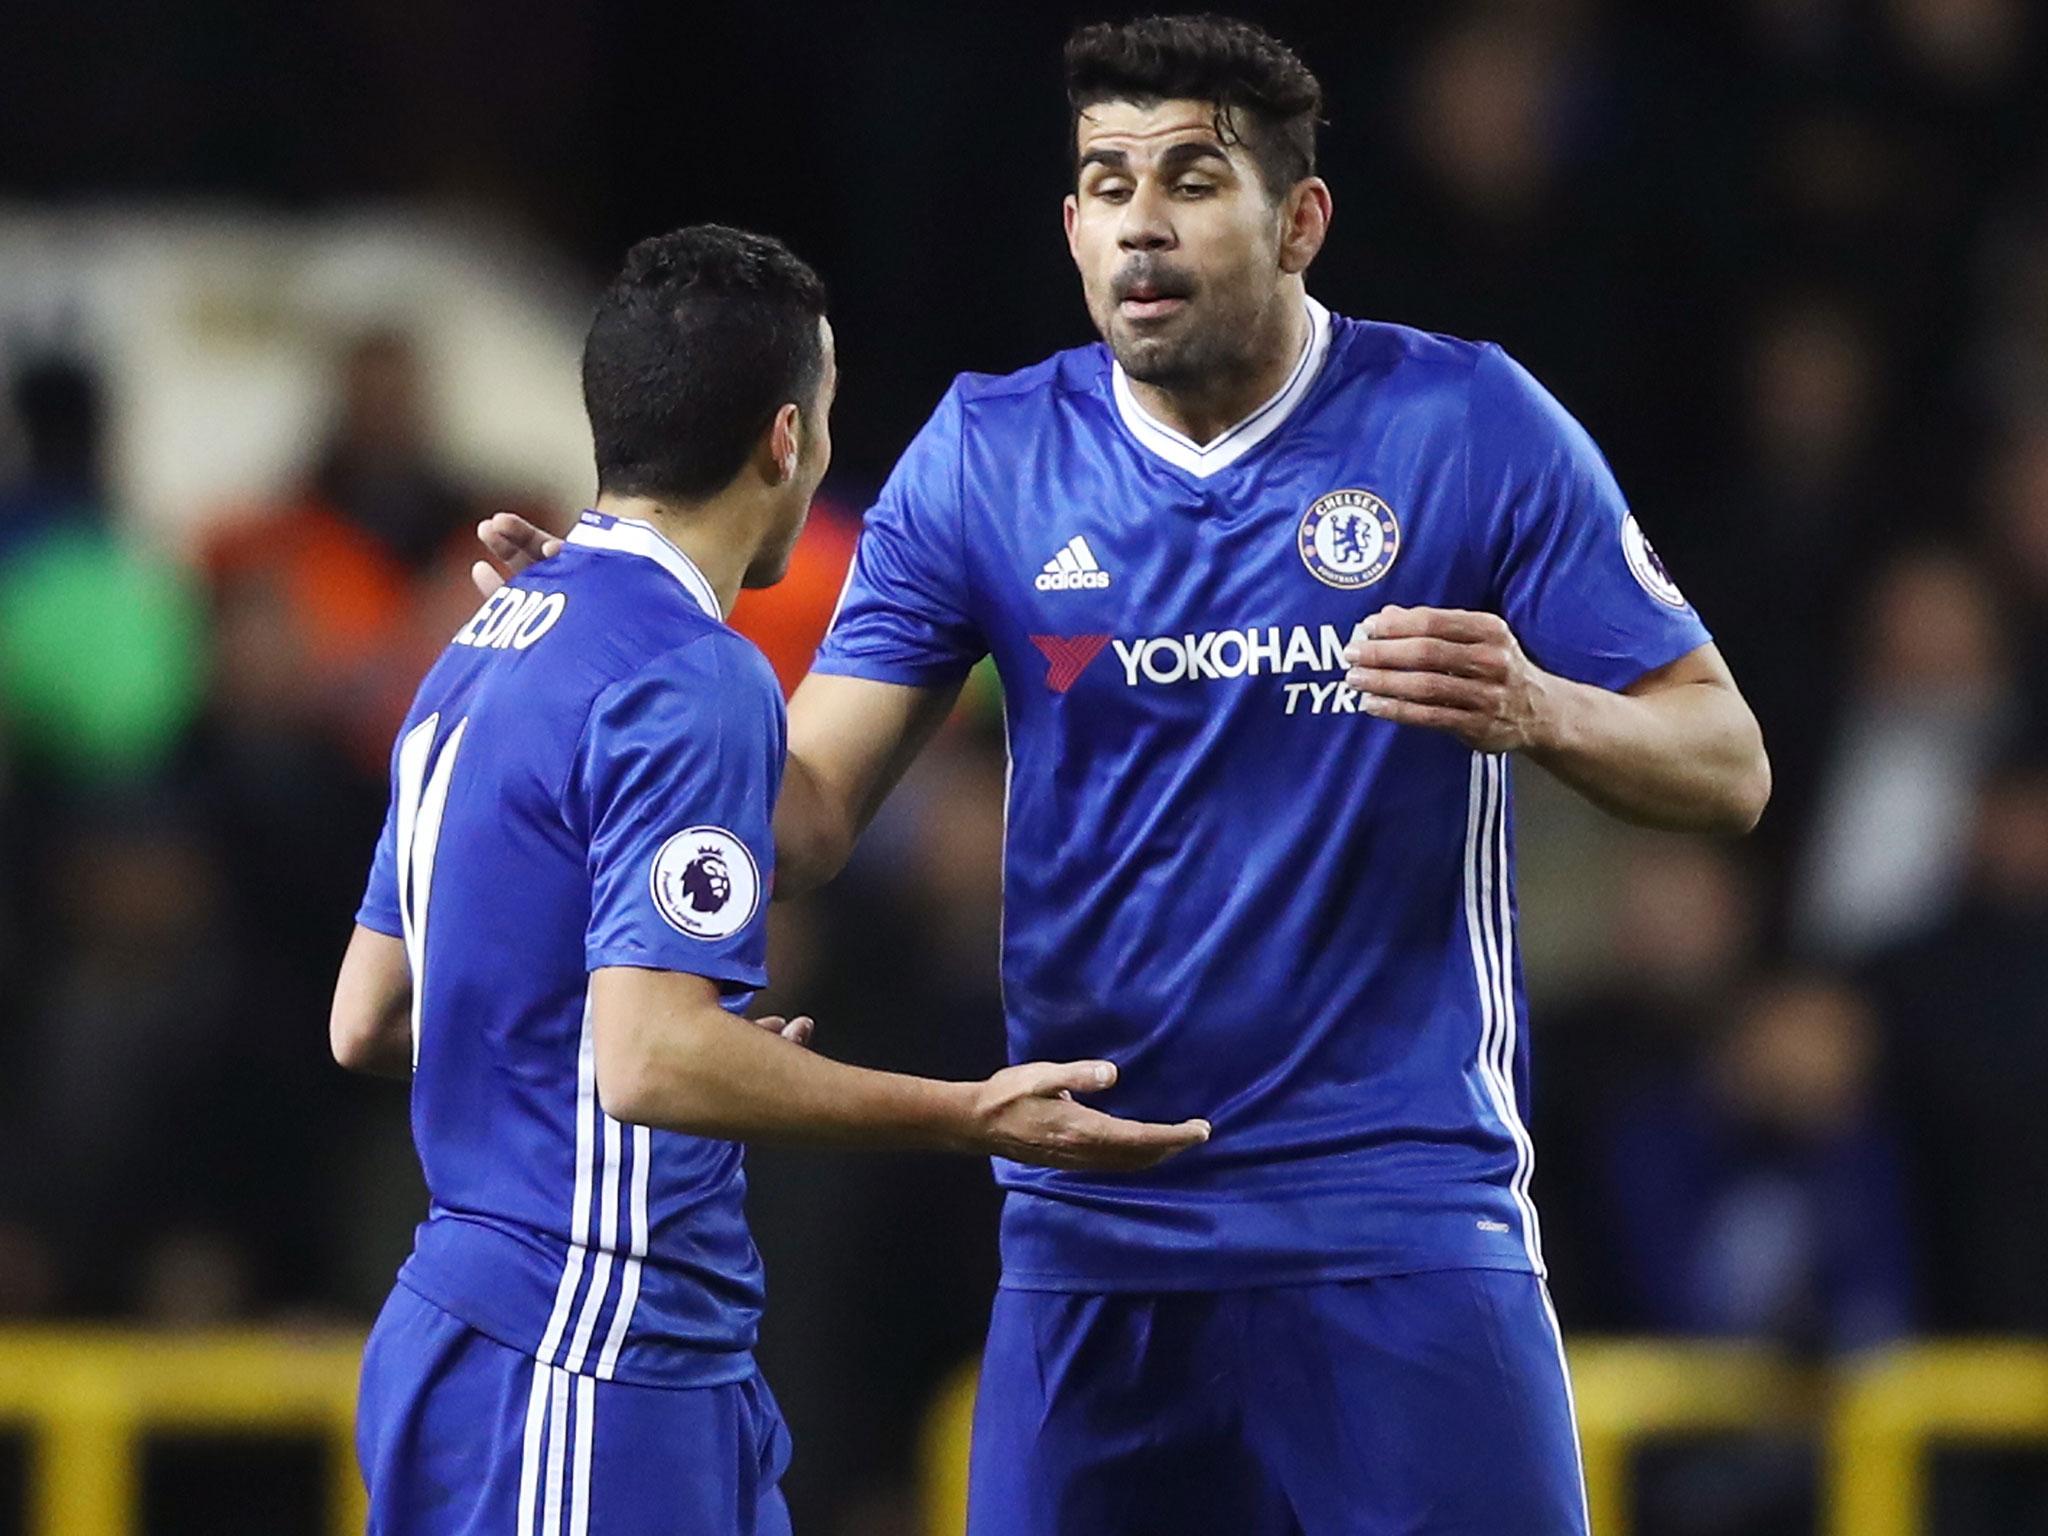 Diego Costa will not be sold by Chelsea even though he will refuse to sign a new contract